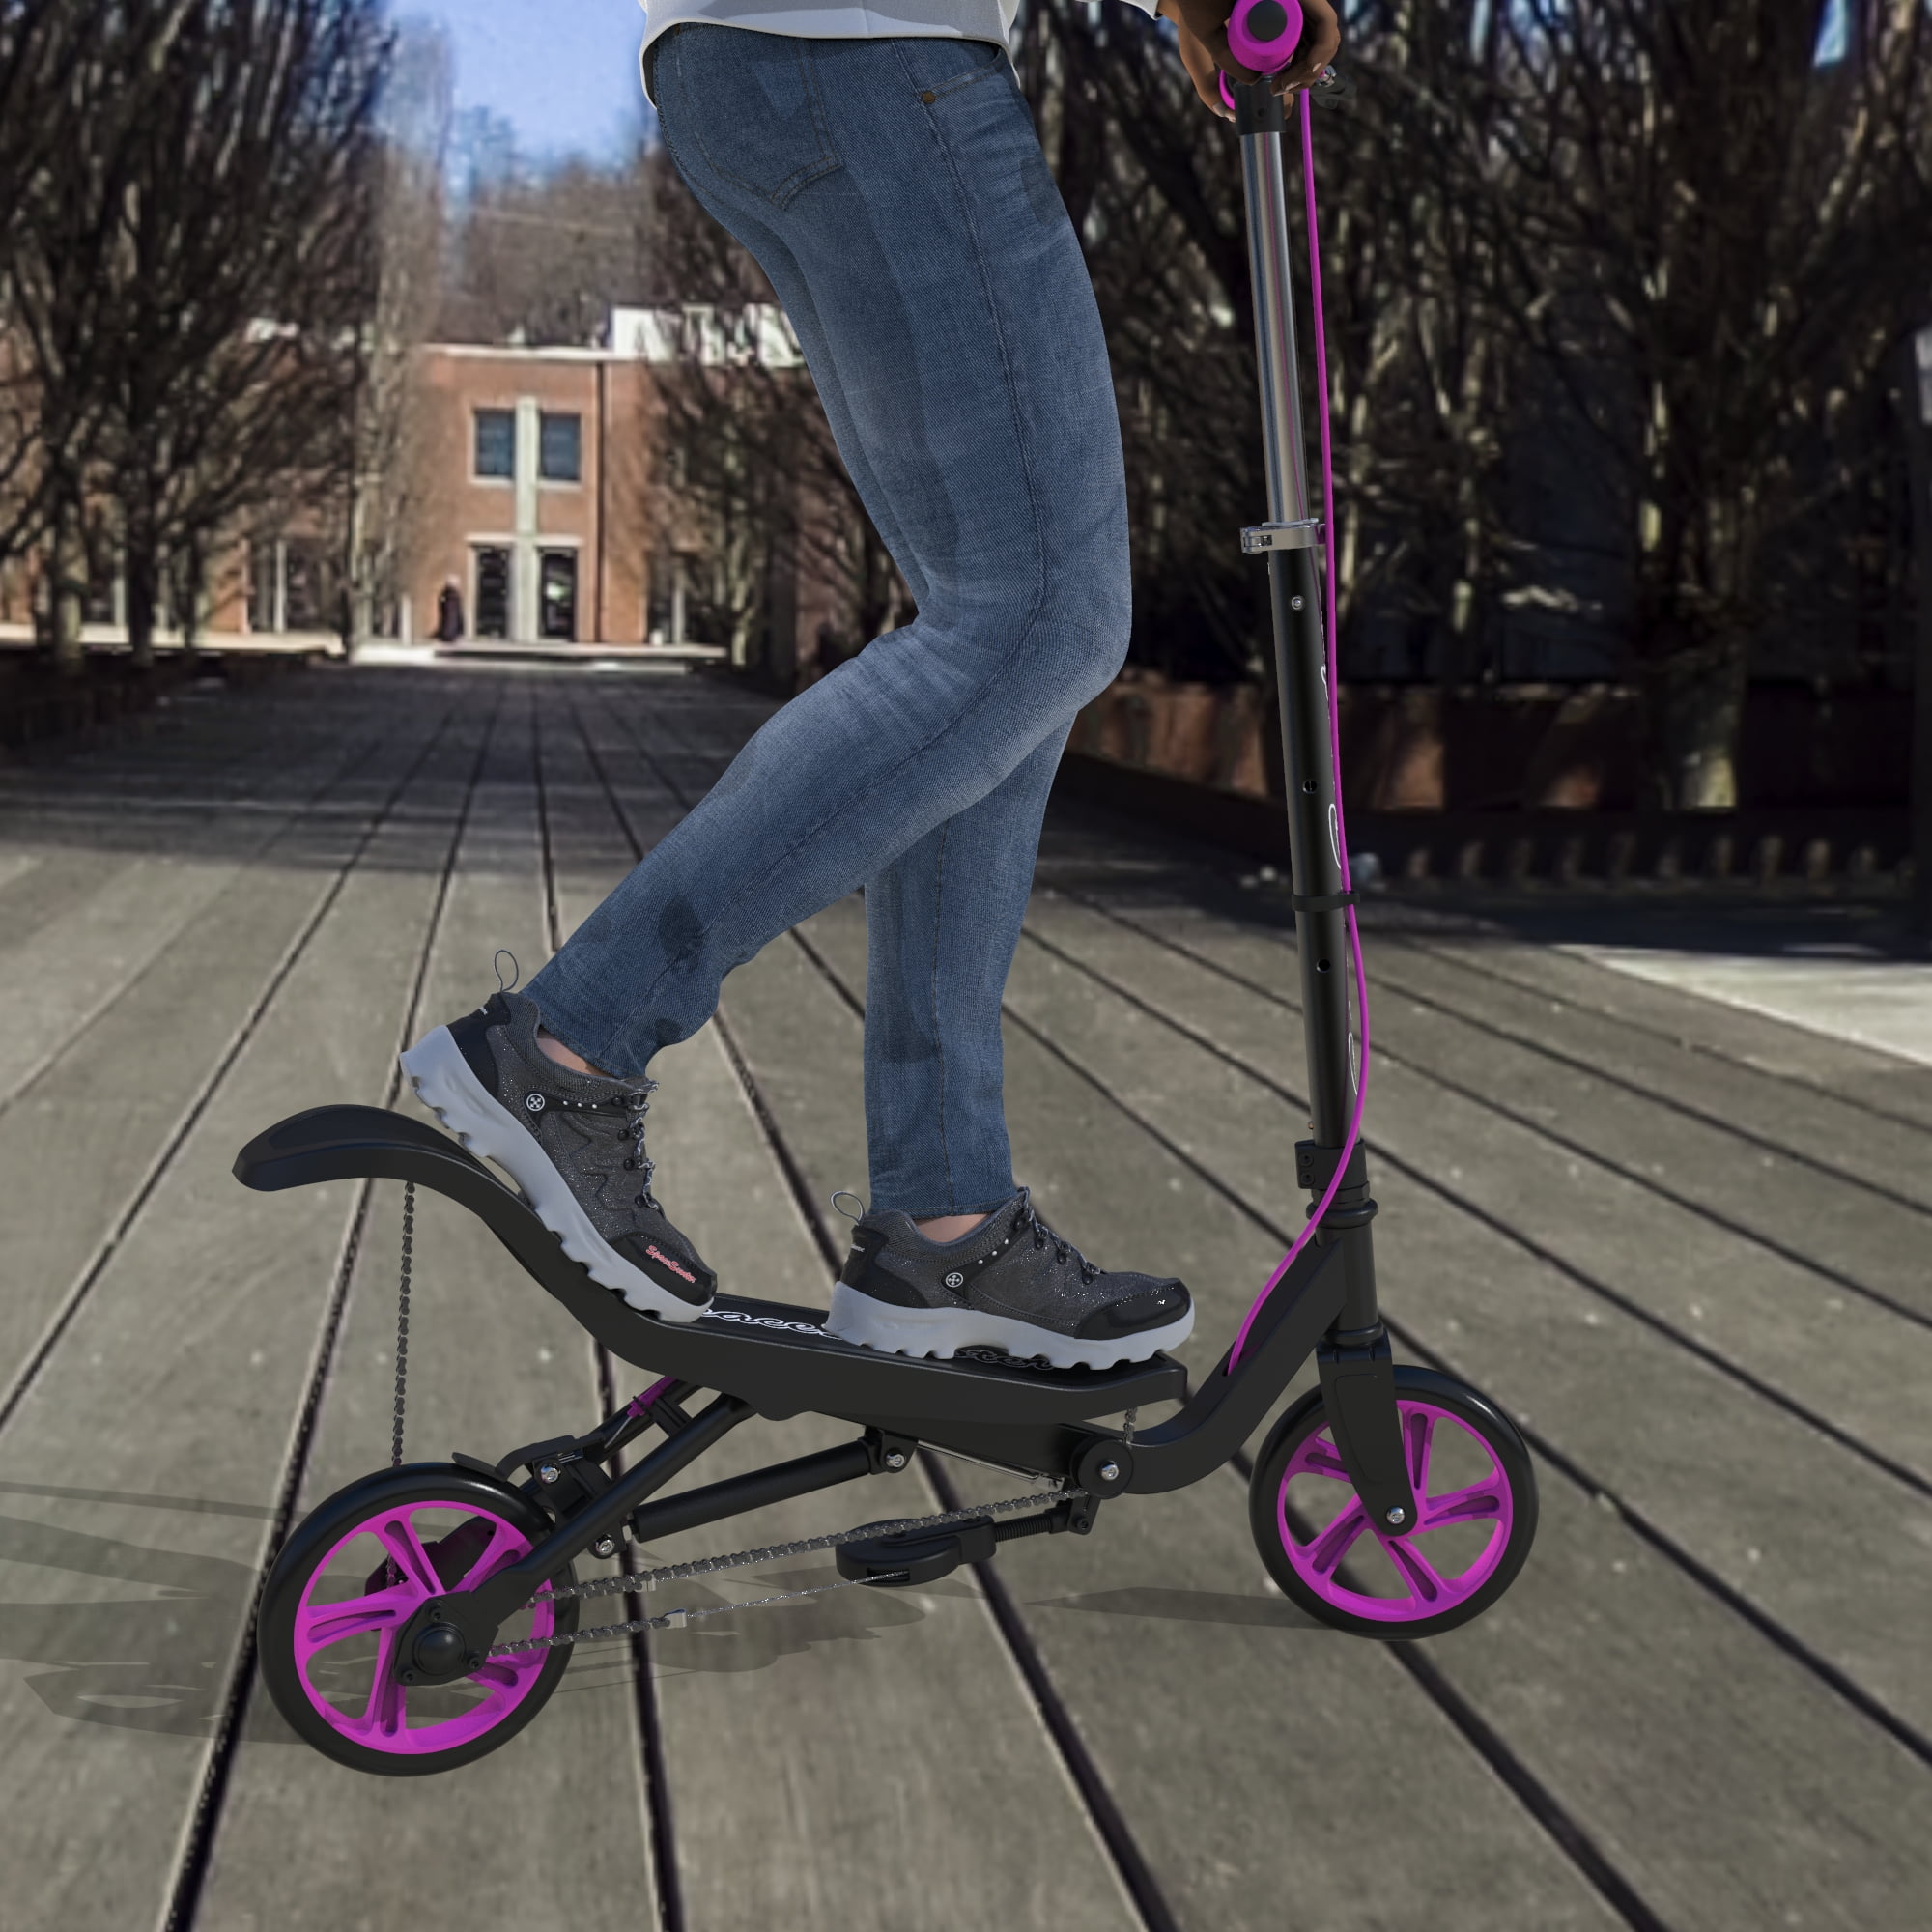 space scooter x540 pink